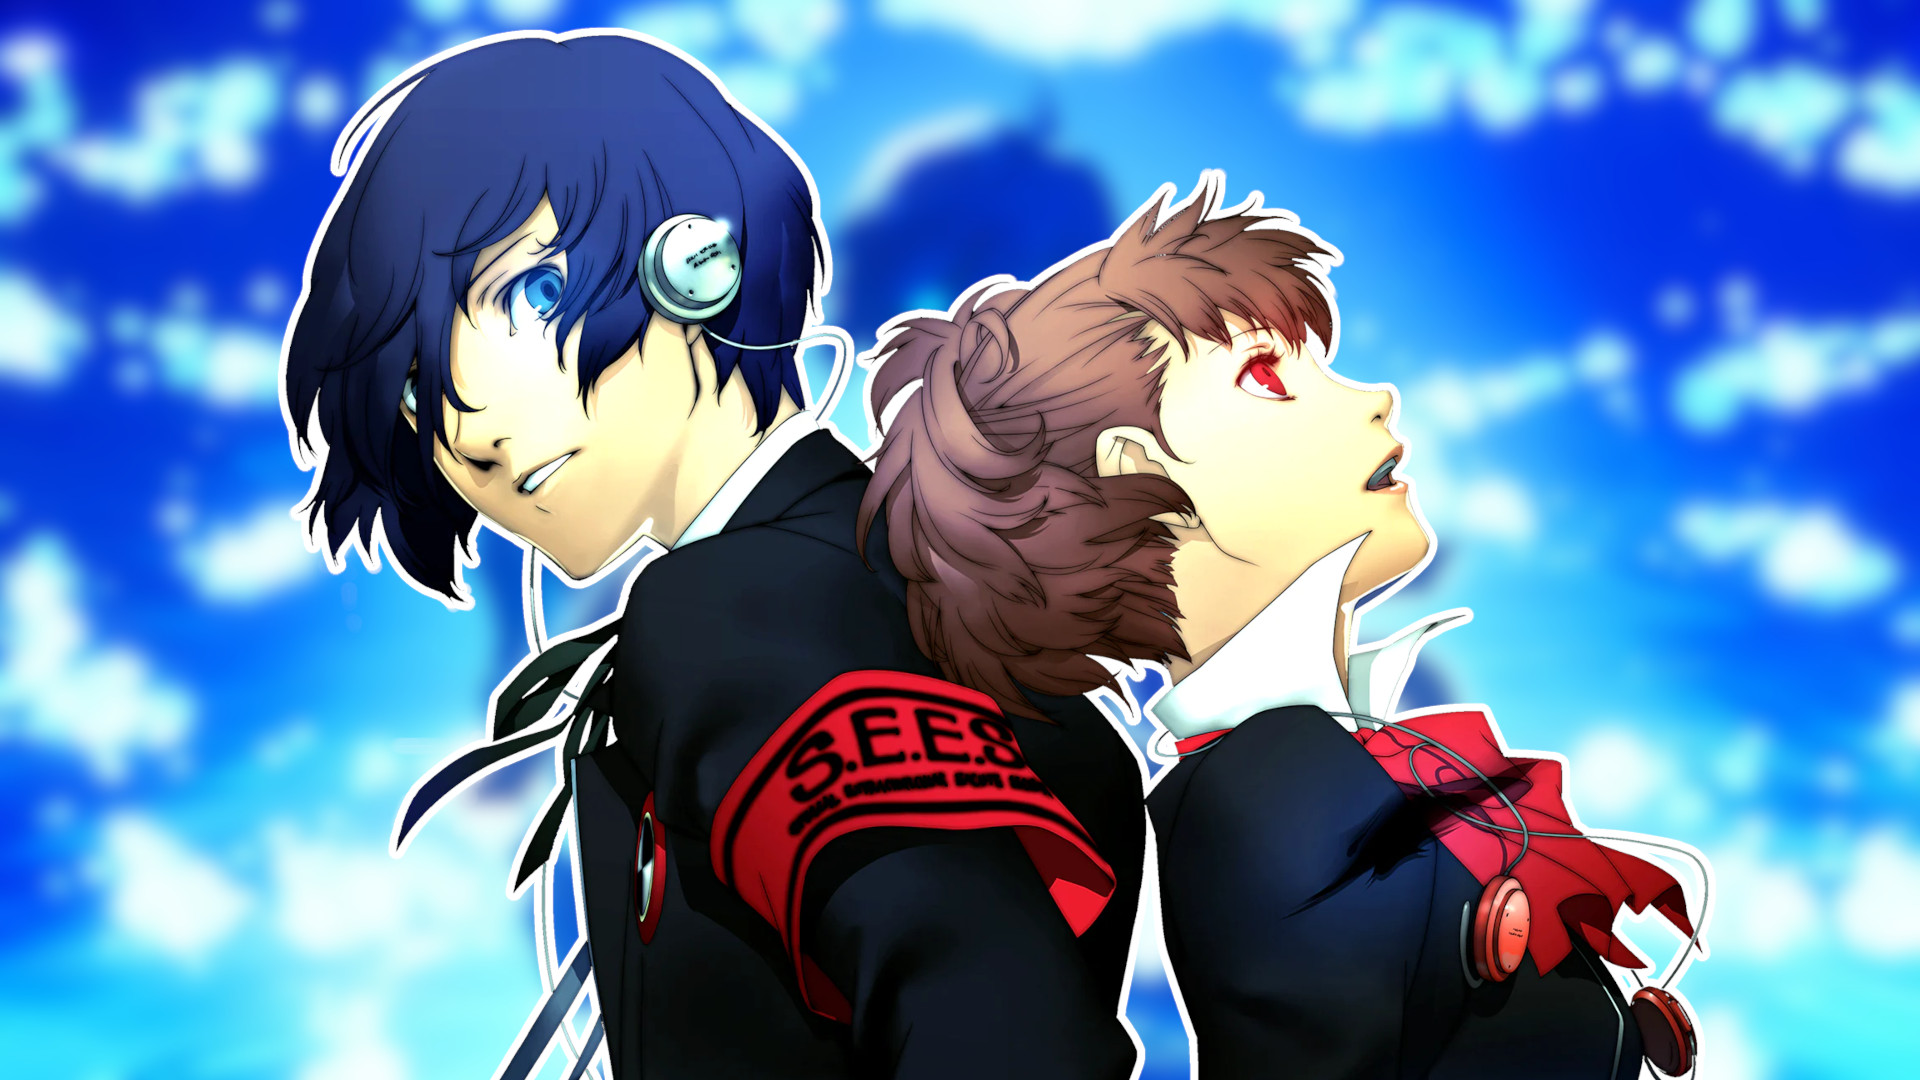 Persona 3 characters – there’s a dog, that’s all you need | Pocket Tactics